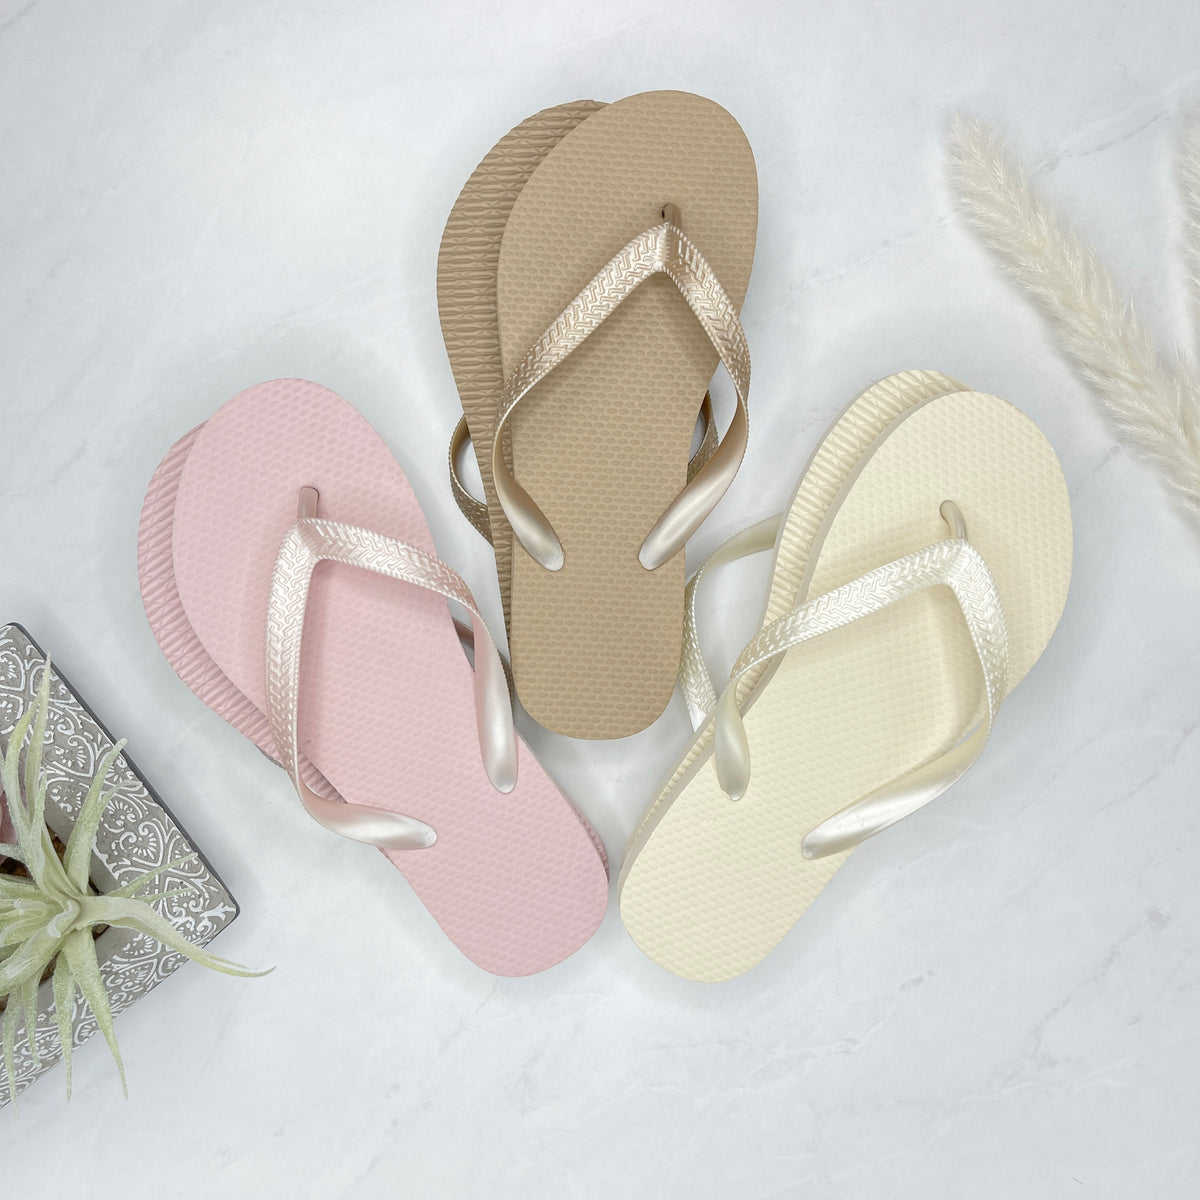 24-120 Pairs Wedding Flip Flops for Guests Bulk Hotel Spa Wedding Sandals  Slippers With Size Favors Wedding Favors for Guests